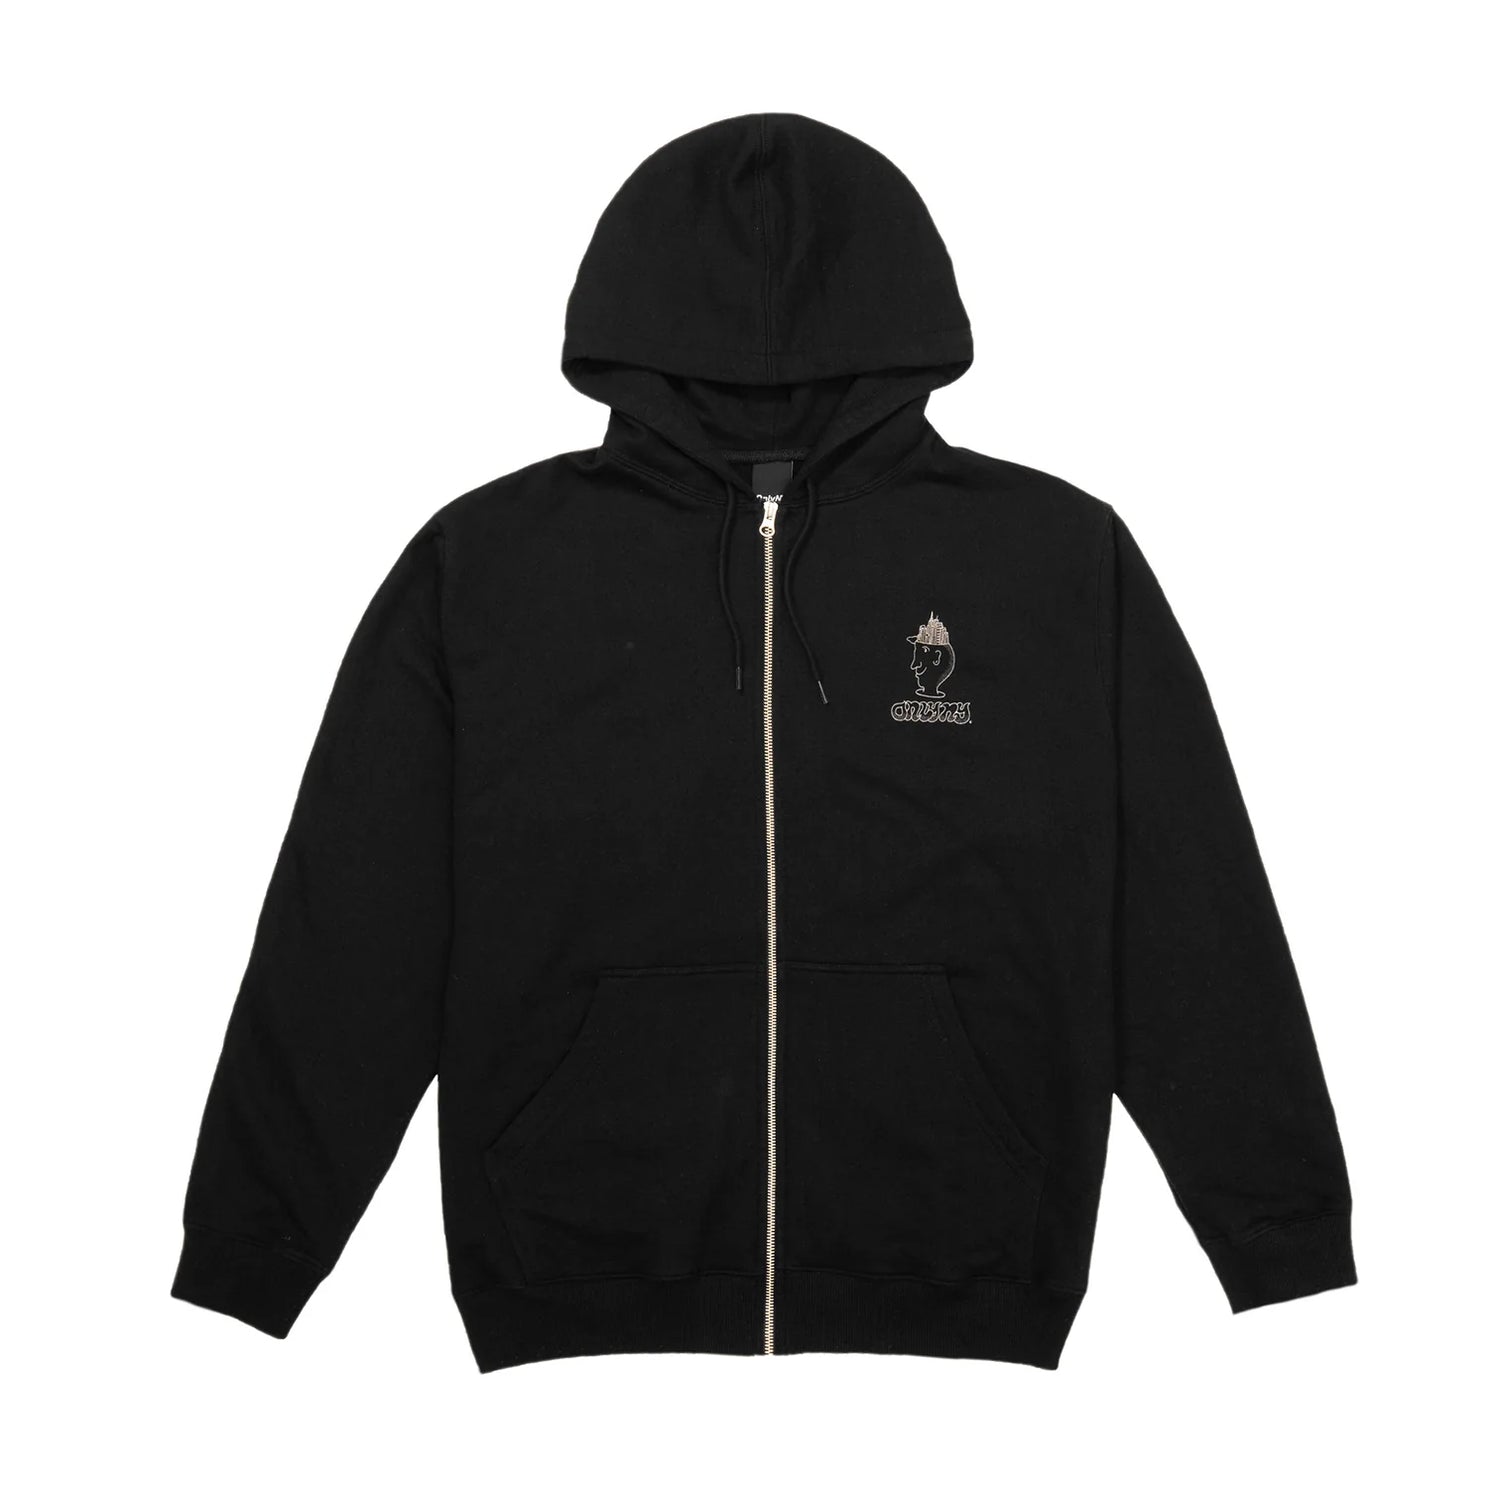 Only NY Astral Traveling Zip Up Hoodie - Black